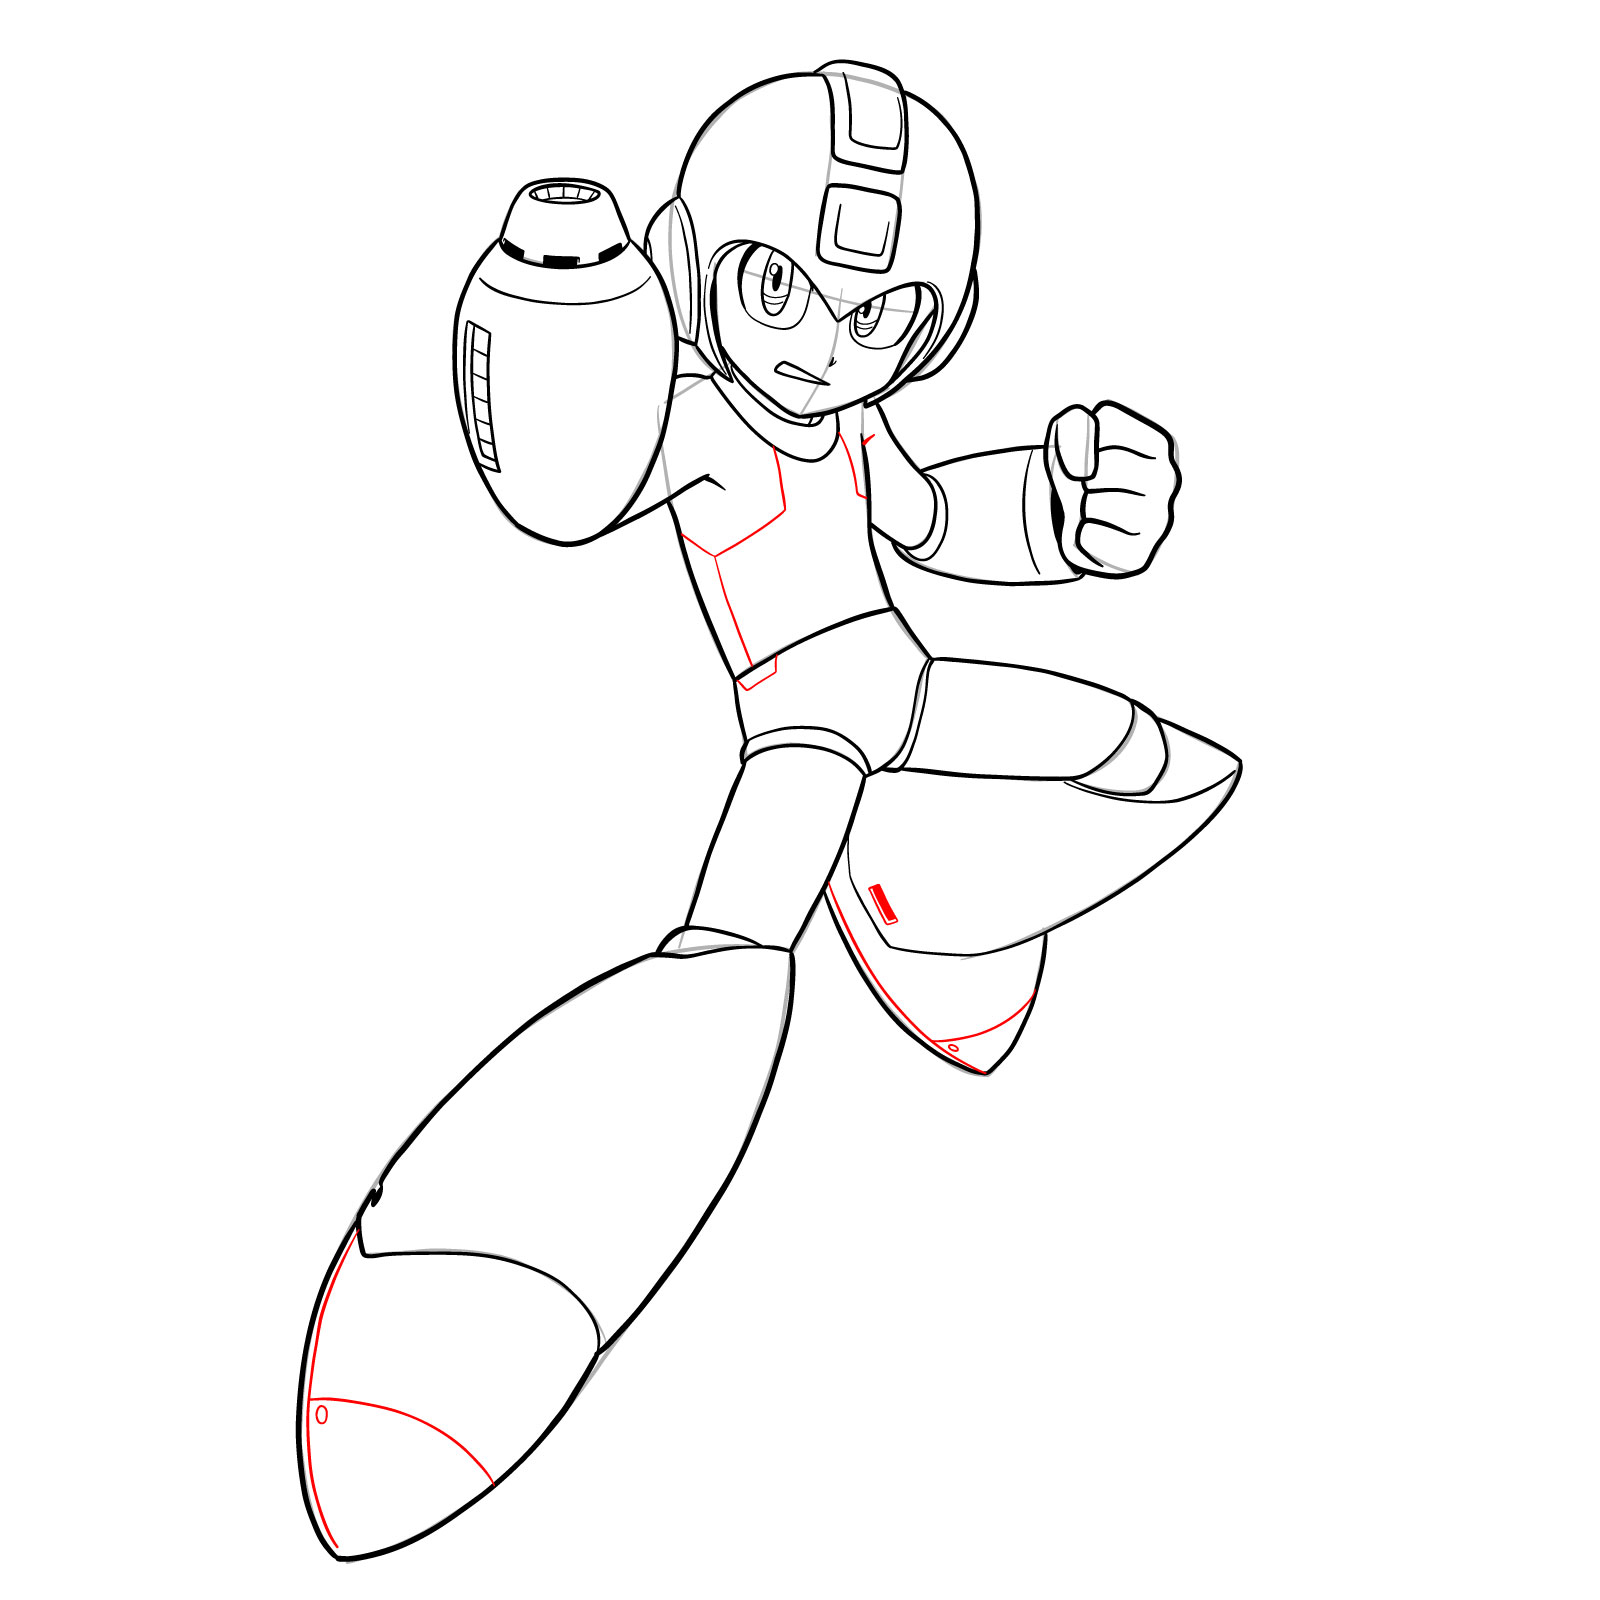 How to draw Mega Man from the 11th game - step 31